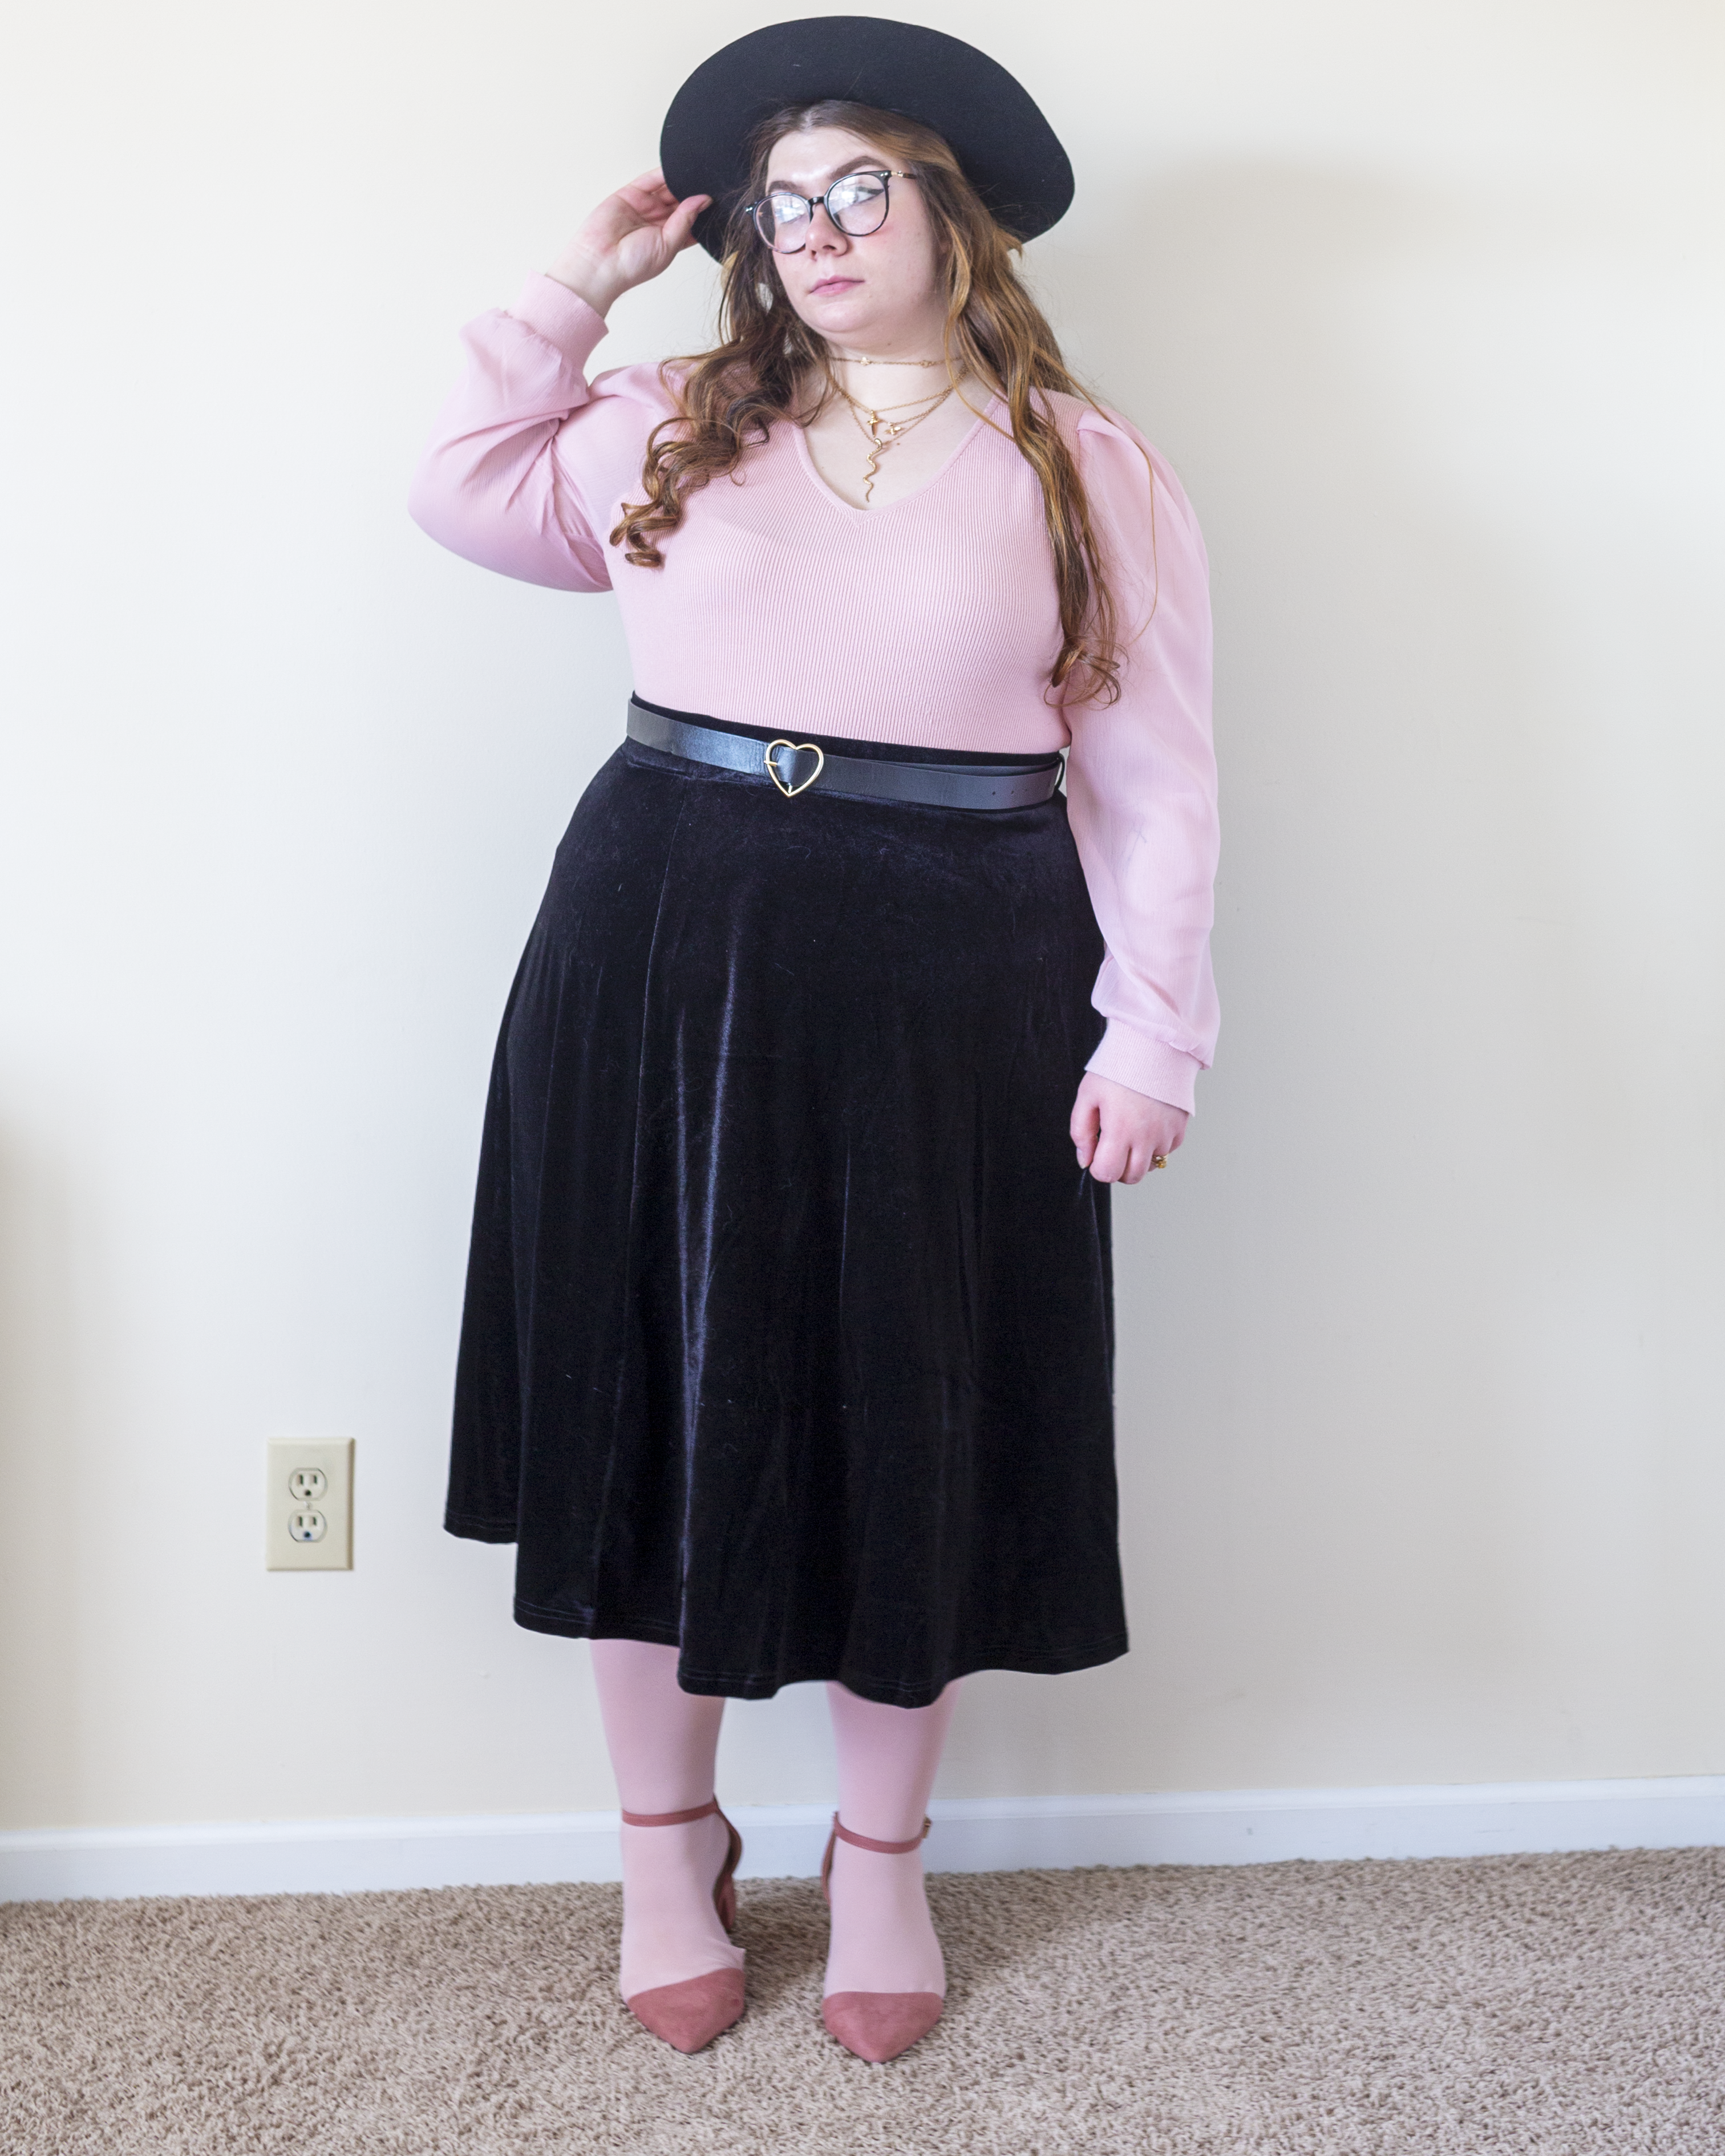 An outfit consisting of a pastel pink v-neck sweater with sheer sleeves, tucked into a black velvet skater midi skirt and pastel pink ankle strap heels.